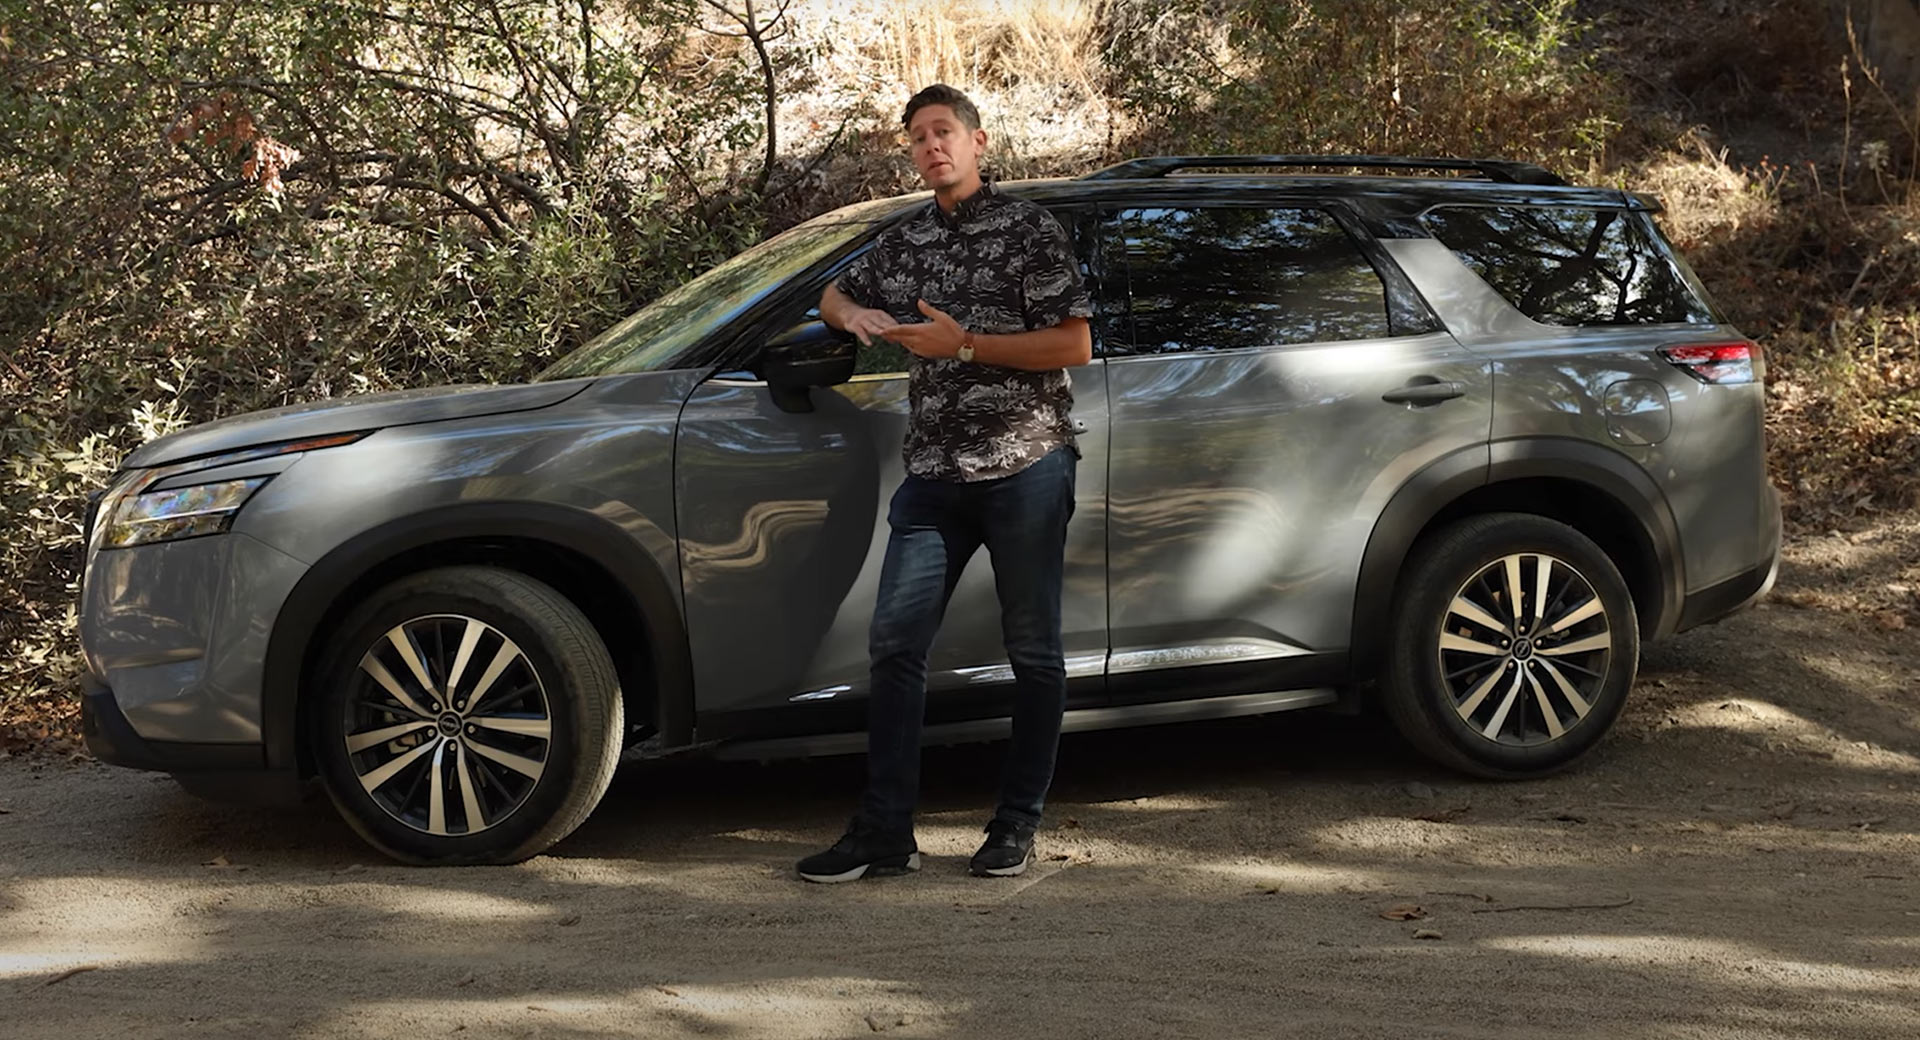 How Does The 2022 Nissan Pathfinder Handle Some Soft Off-Roading? Auto Recent